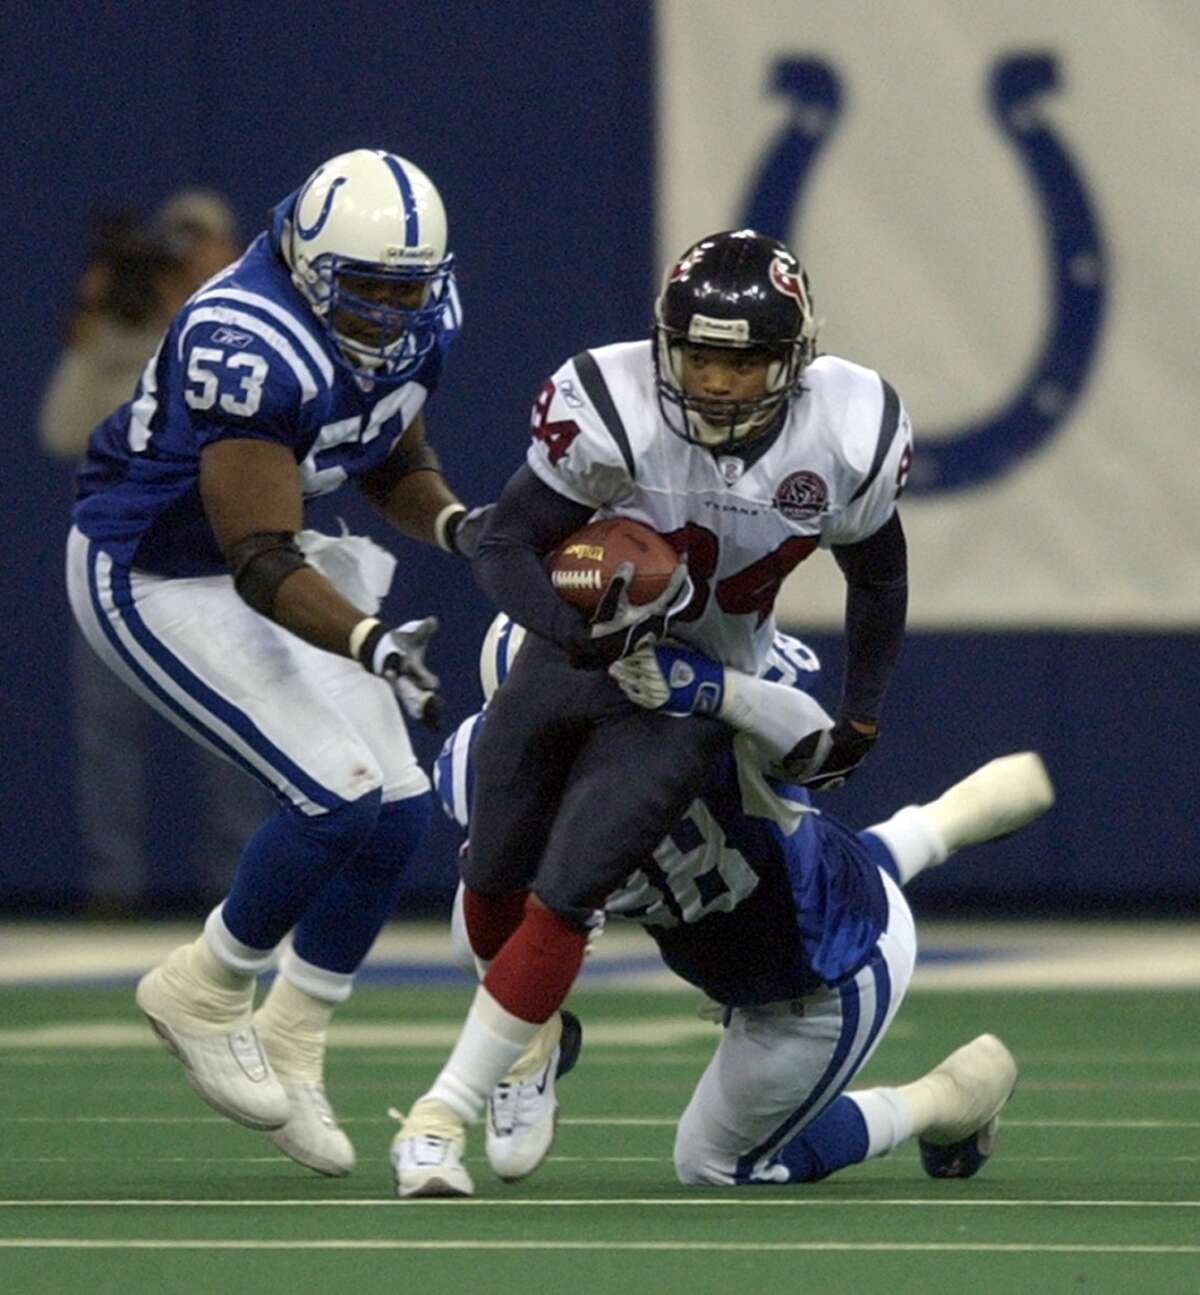 Dec. 1, 2002: Colts 19, Texans 3 In the Texans' first visit to Indy, the Colts once again would not yield a touchdown to Houston. The Texans were held to one field goal that was kicked with less than two minutes to go in the game)